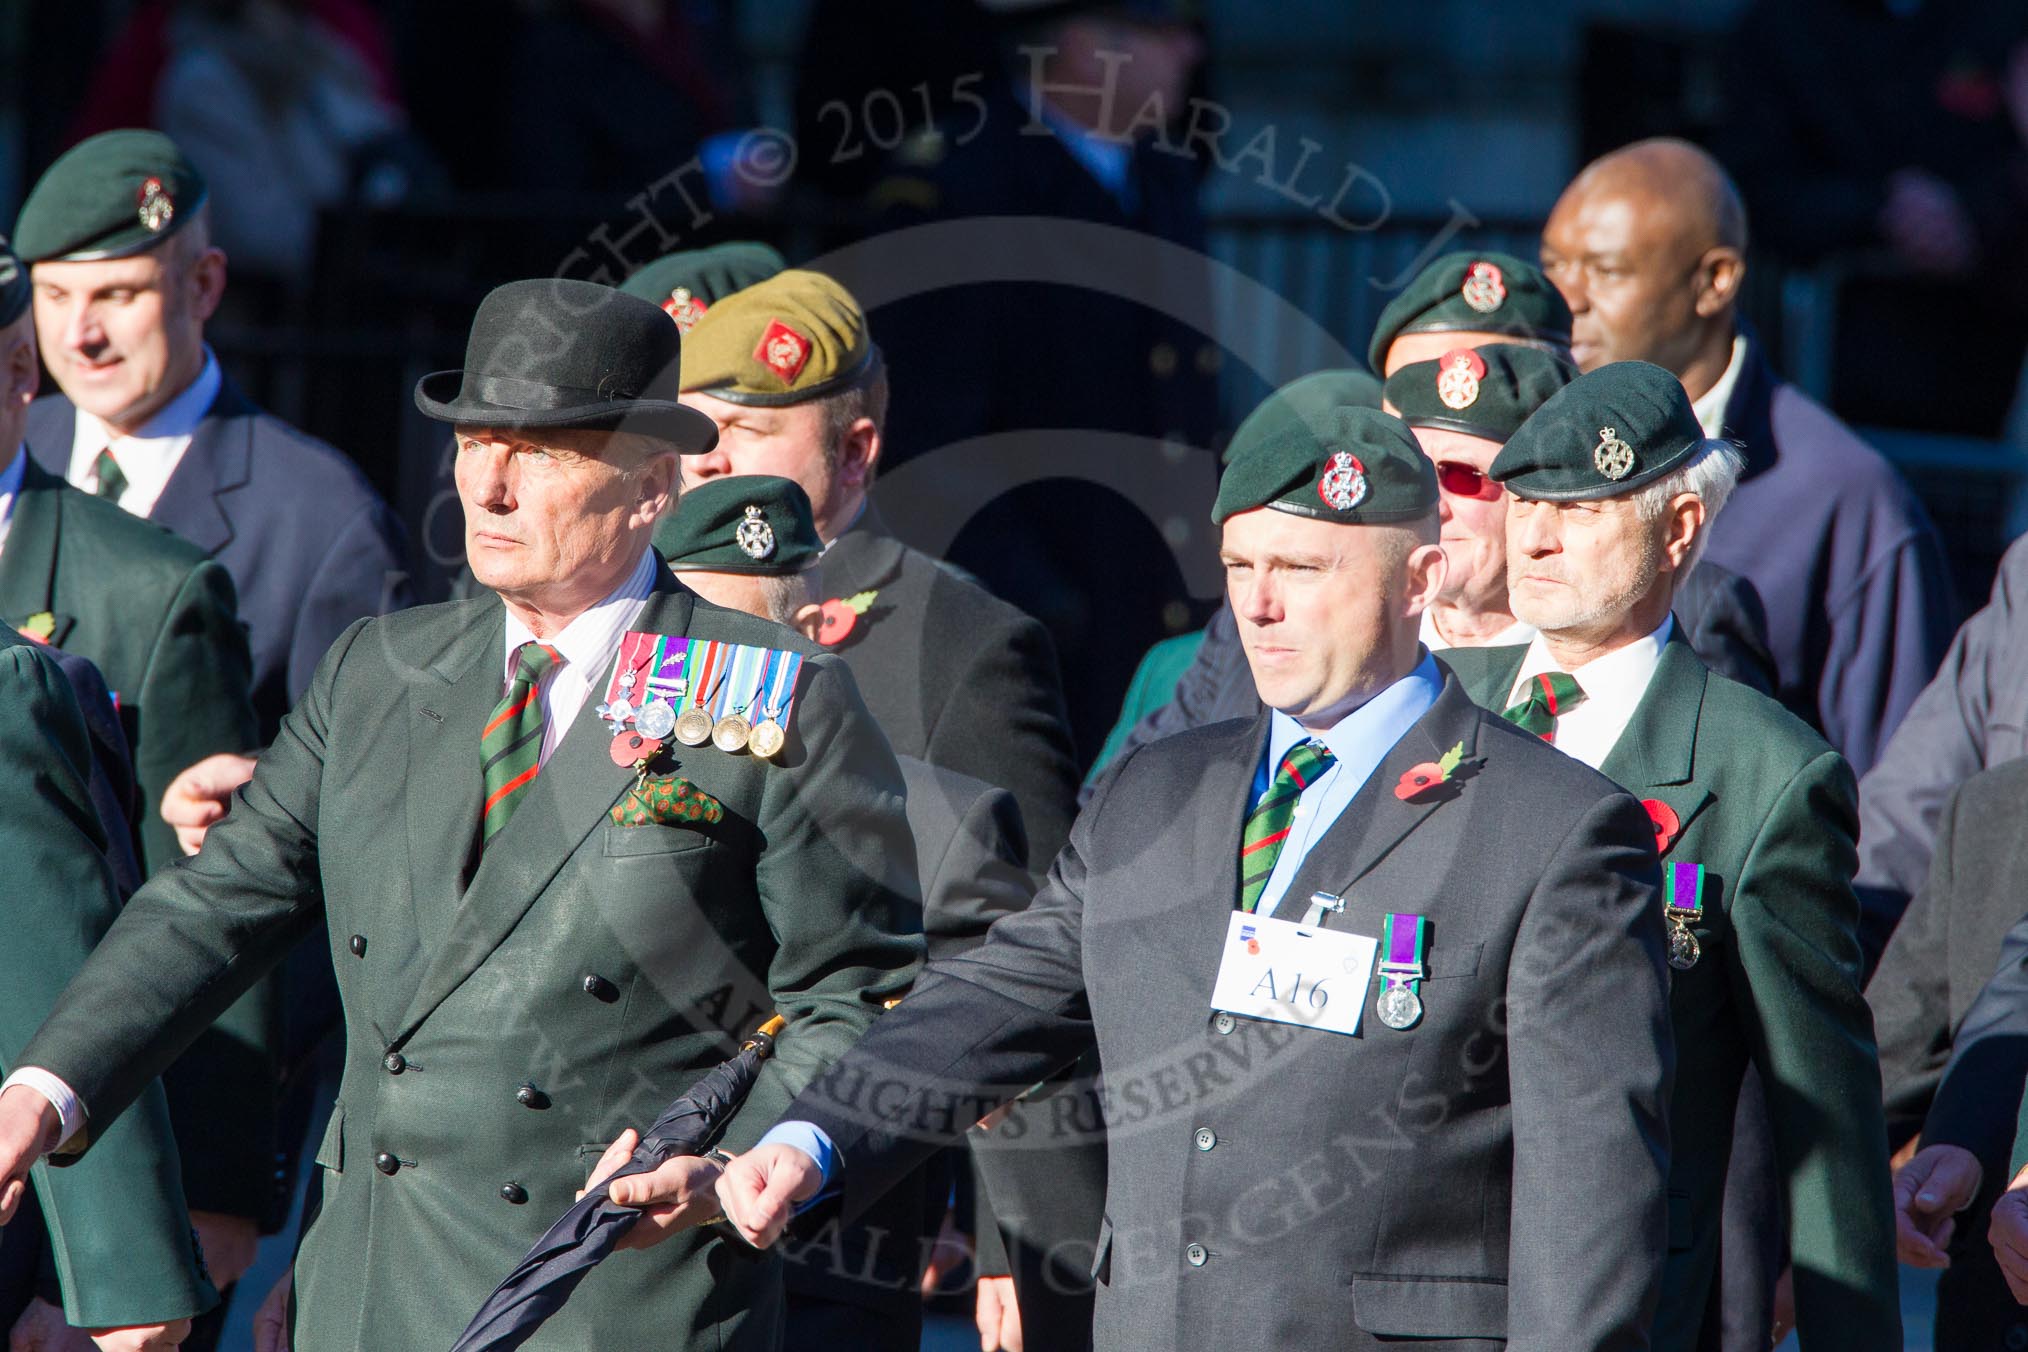 Remembrance Sunday Cenotaph March Past 2013: A16 - Royal Green Jackets Association..
Press stand opposite the Foreign Office building, Whitehall, London SW1,
London,
Greater London,
United Kingdom,
on 10 November 2013 at 11:56, image #1129